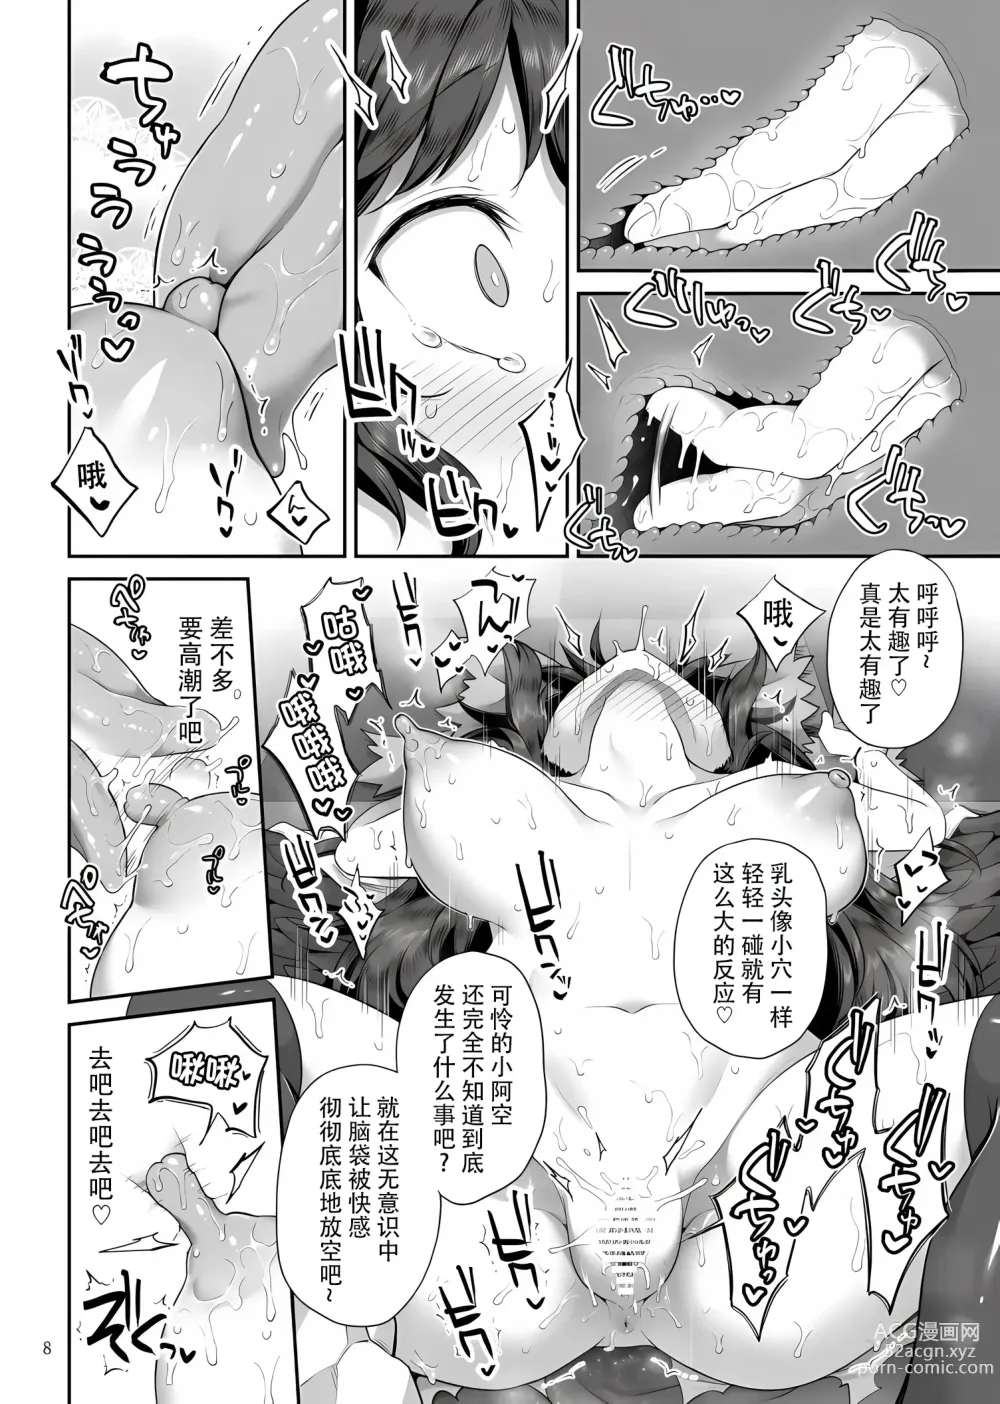 Page 8 of doujinshi [Unmei no Ikasumi (Harusame) Super Id (Touhou Project) [Chinese] [79%汉化组] [Digital]